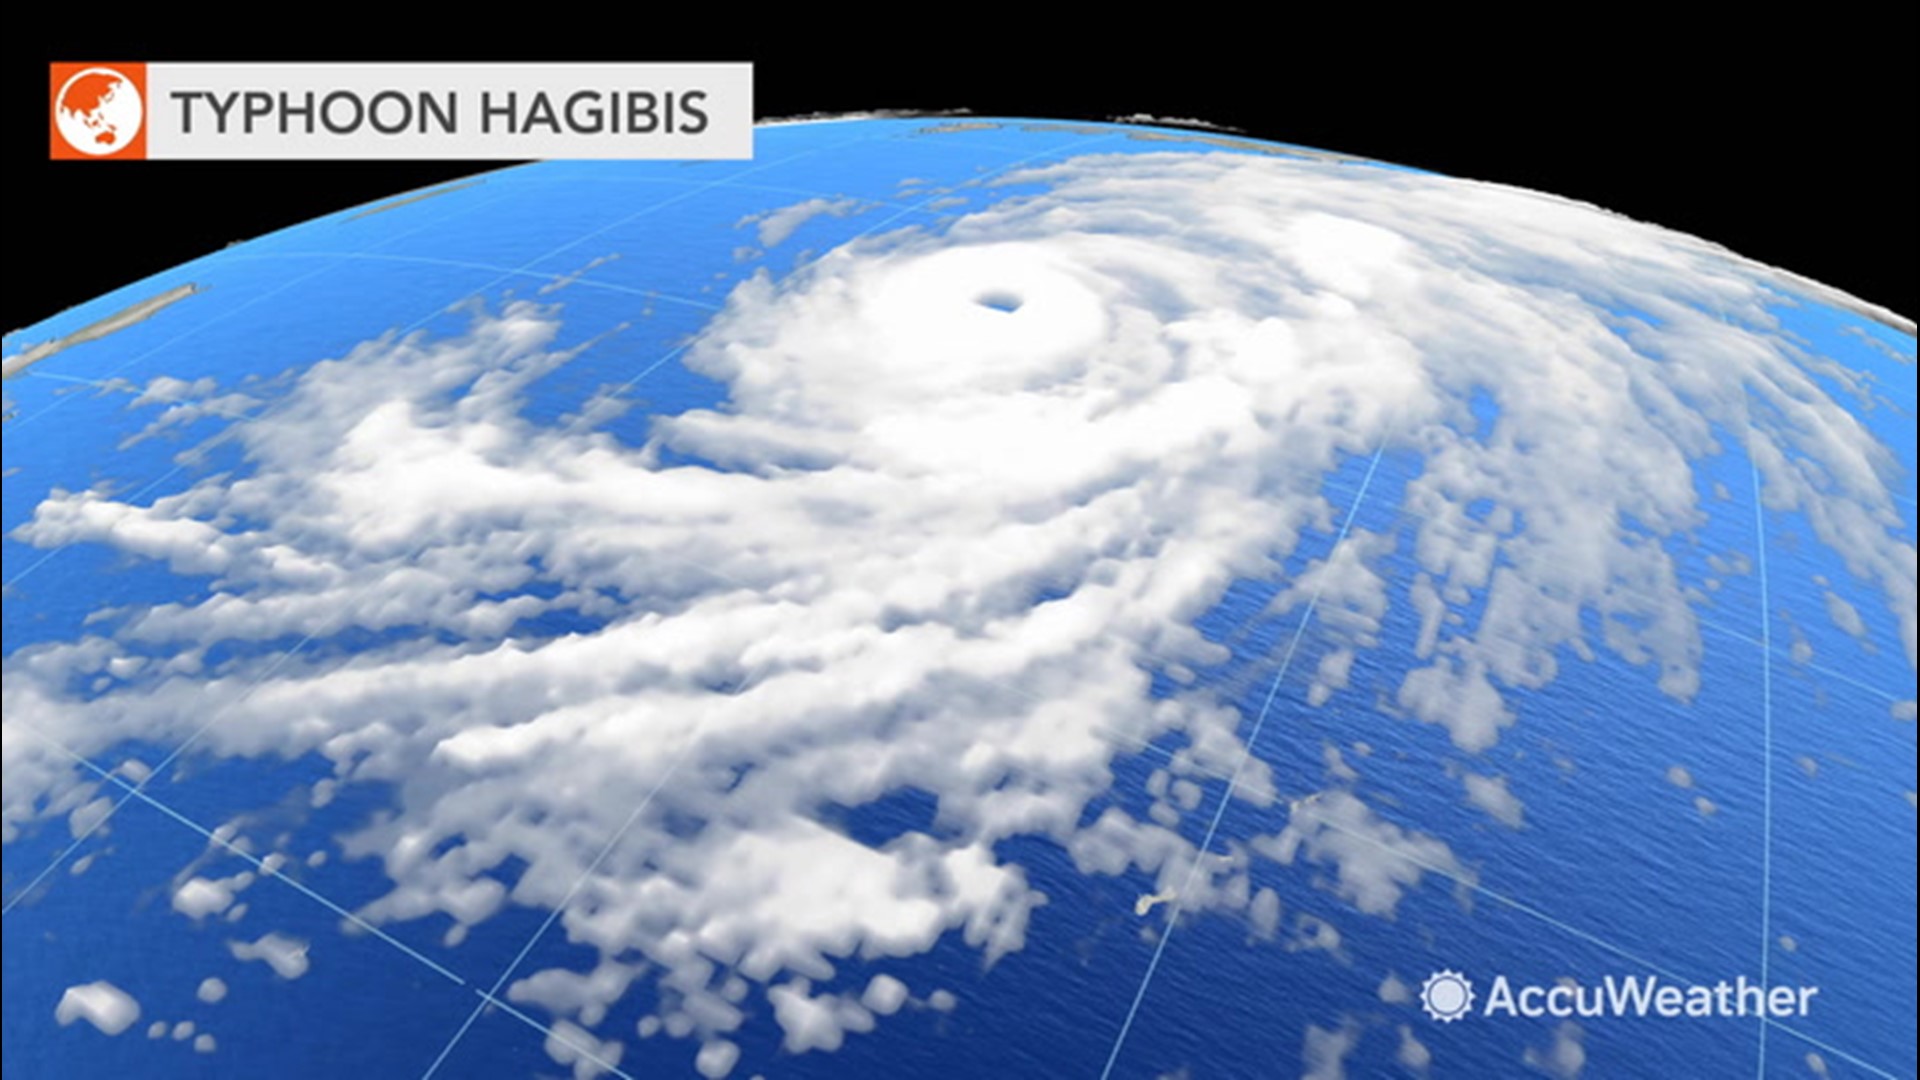 Typhoon Hagibis is forecast to strike Japan later this week and it may still be producing winds equal to a Category 3 major hurricane.